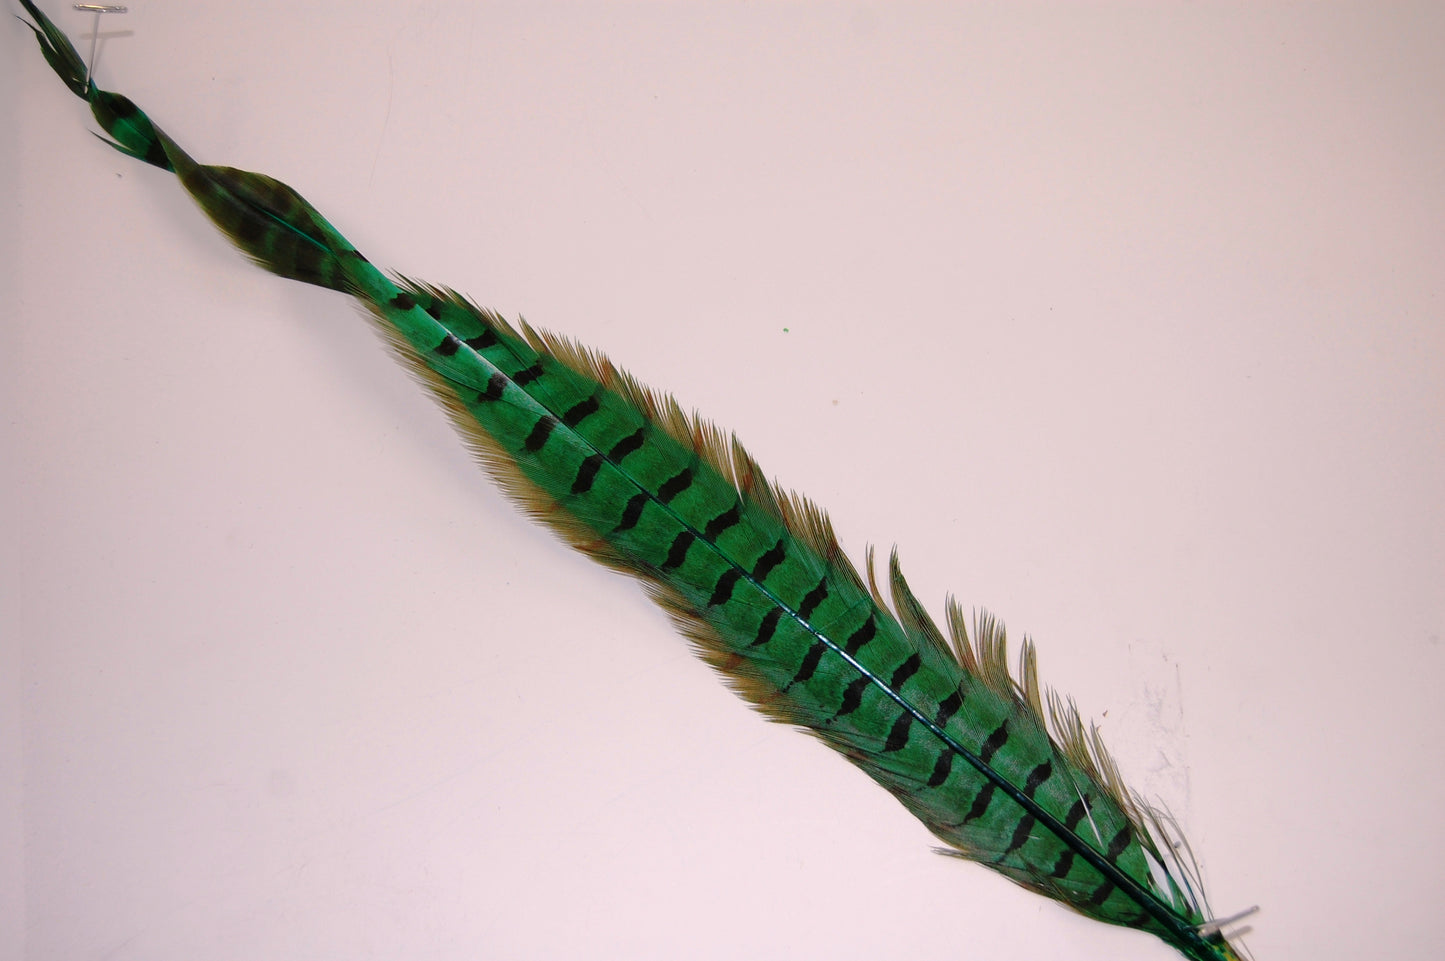 Parried English Ringneck Pheasant Tails 20-26"